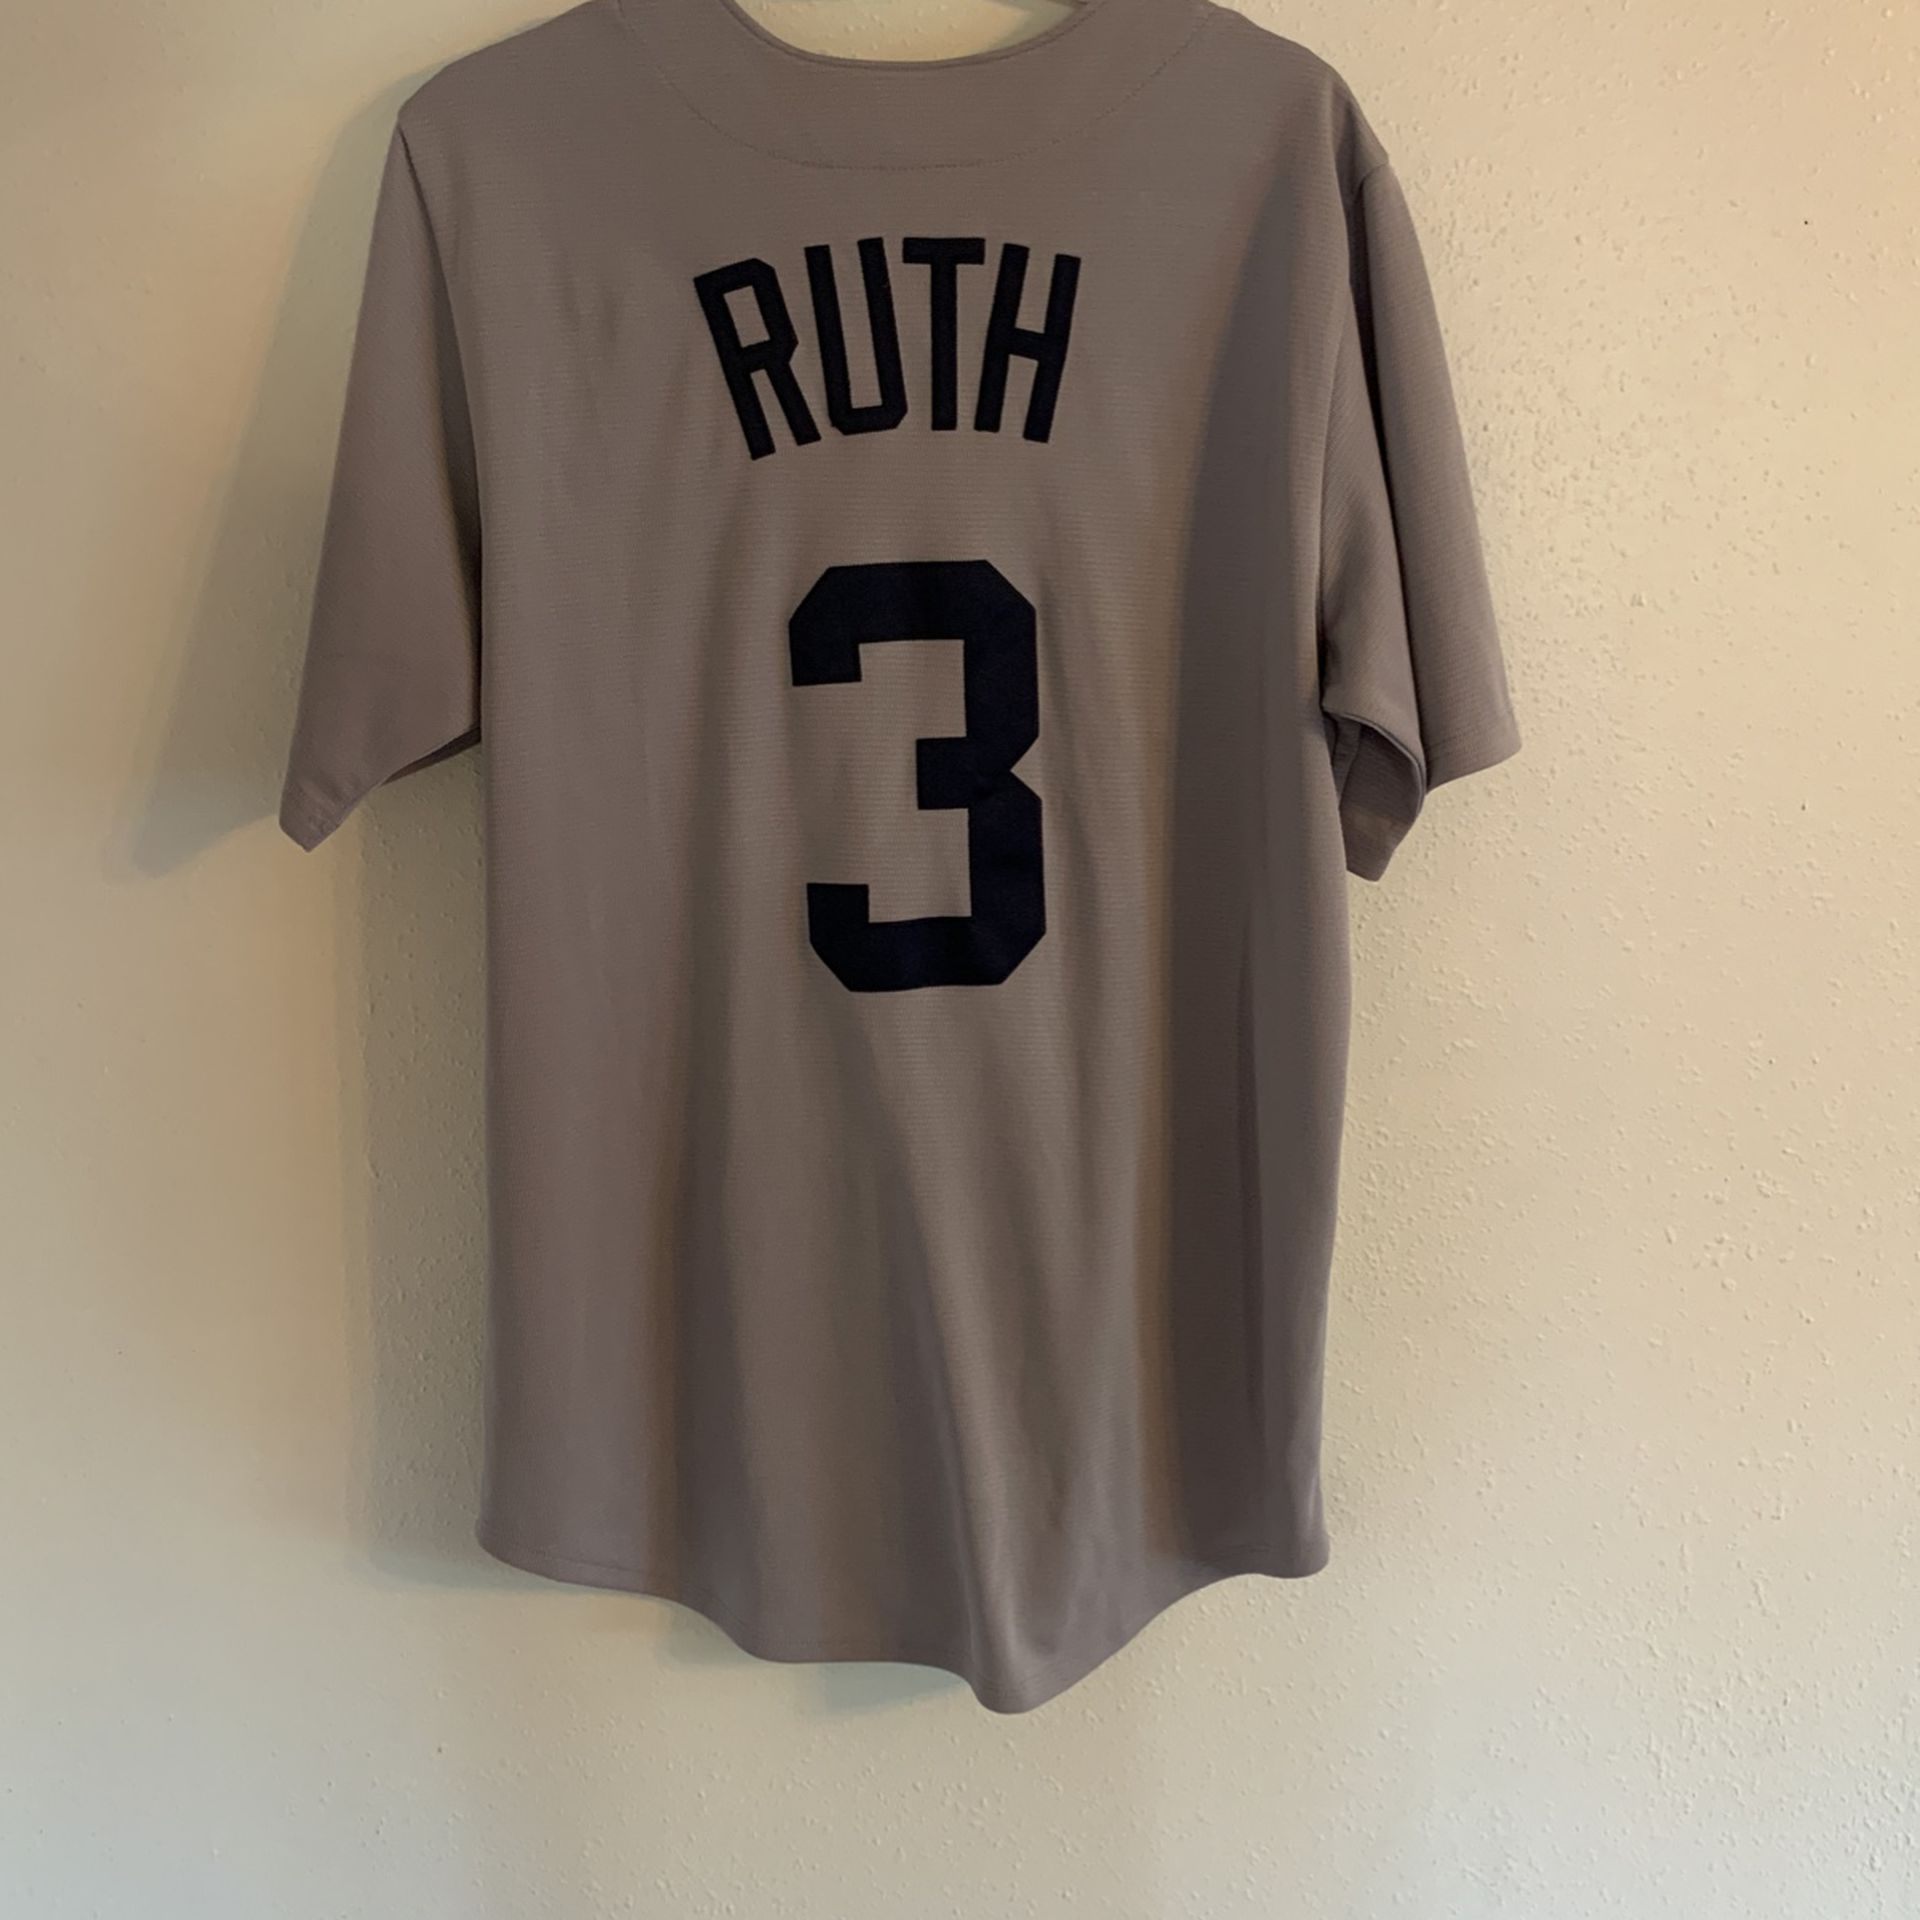 babe ruth jersey mens